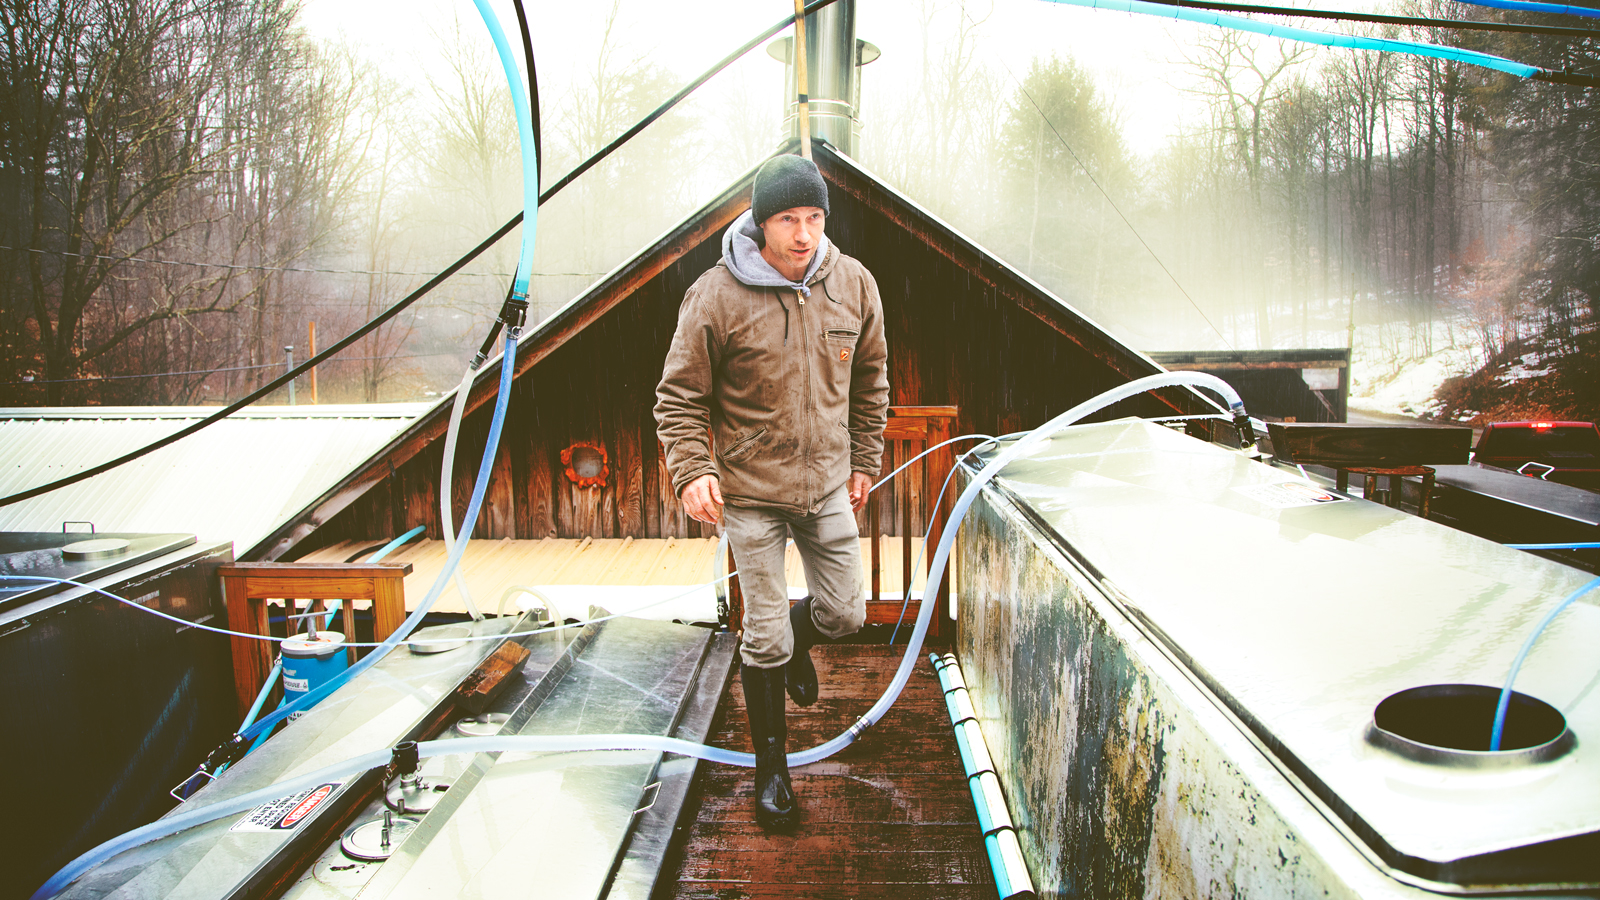 A man standing on the roof of a sugar house among a set of tubes transporting sap from maple trees.